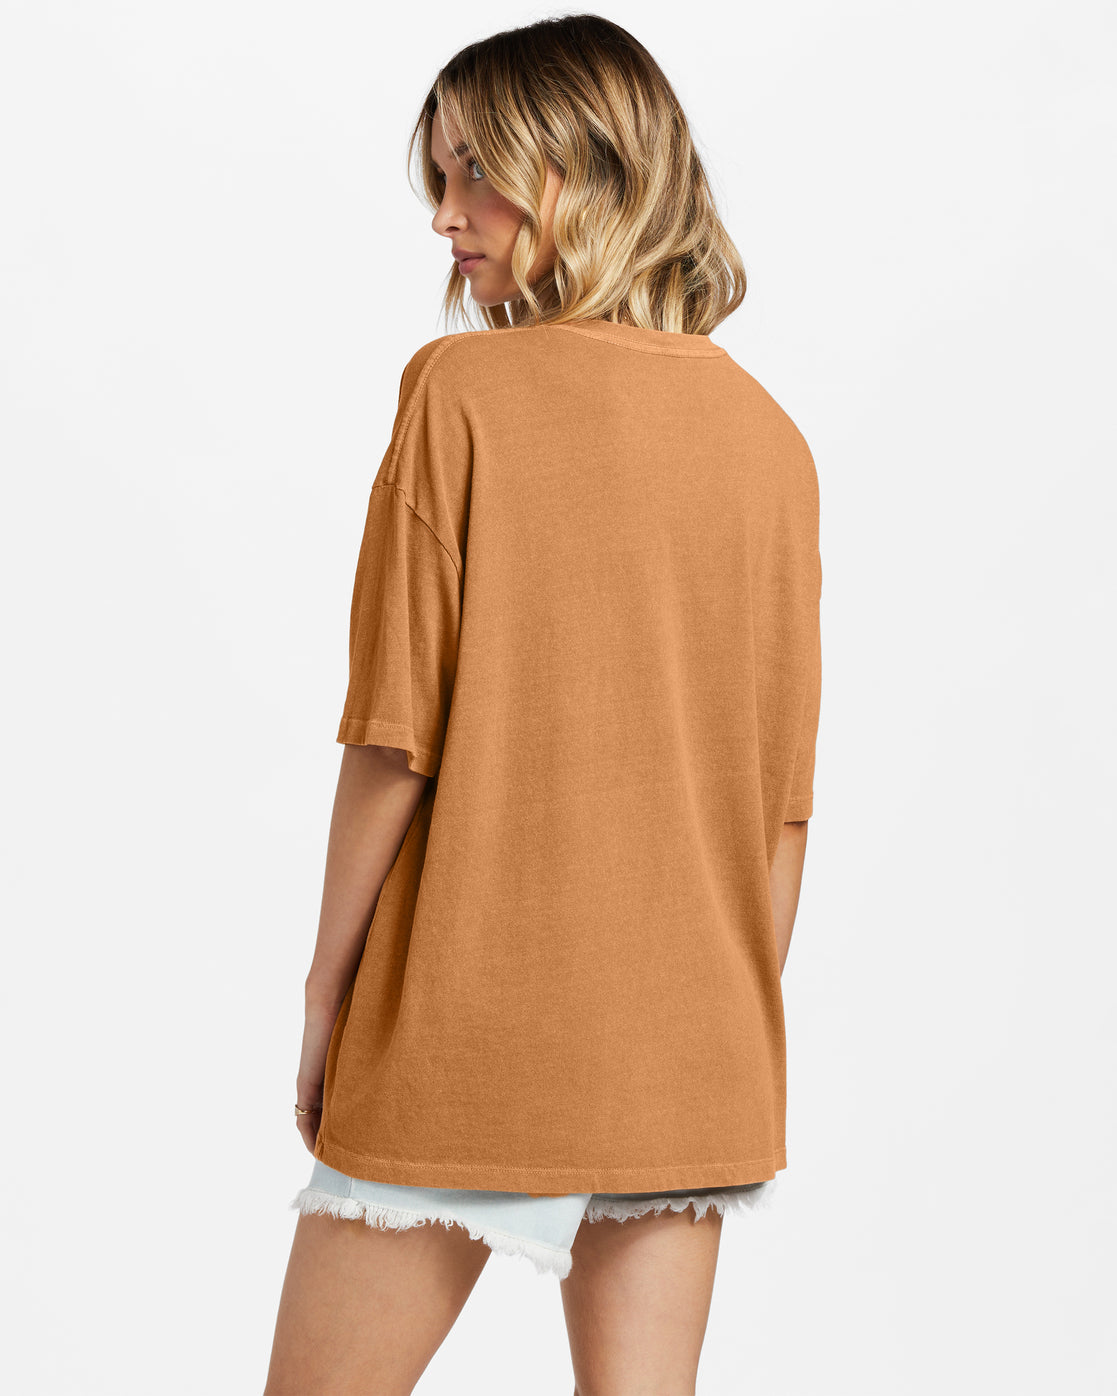 Shine For You Oversized T-Shirt